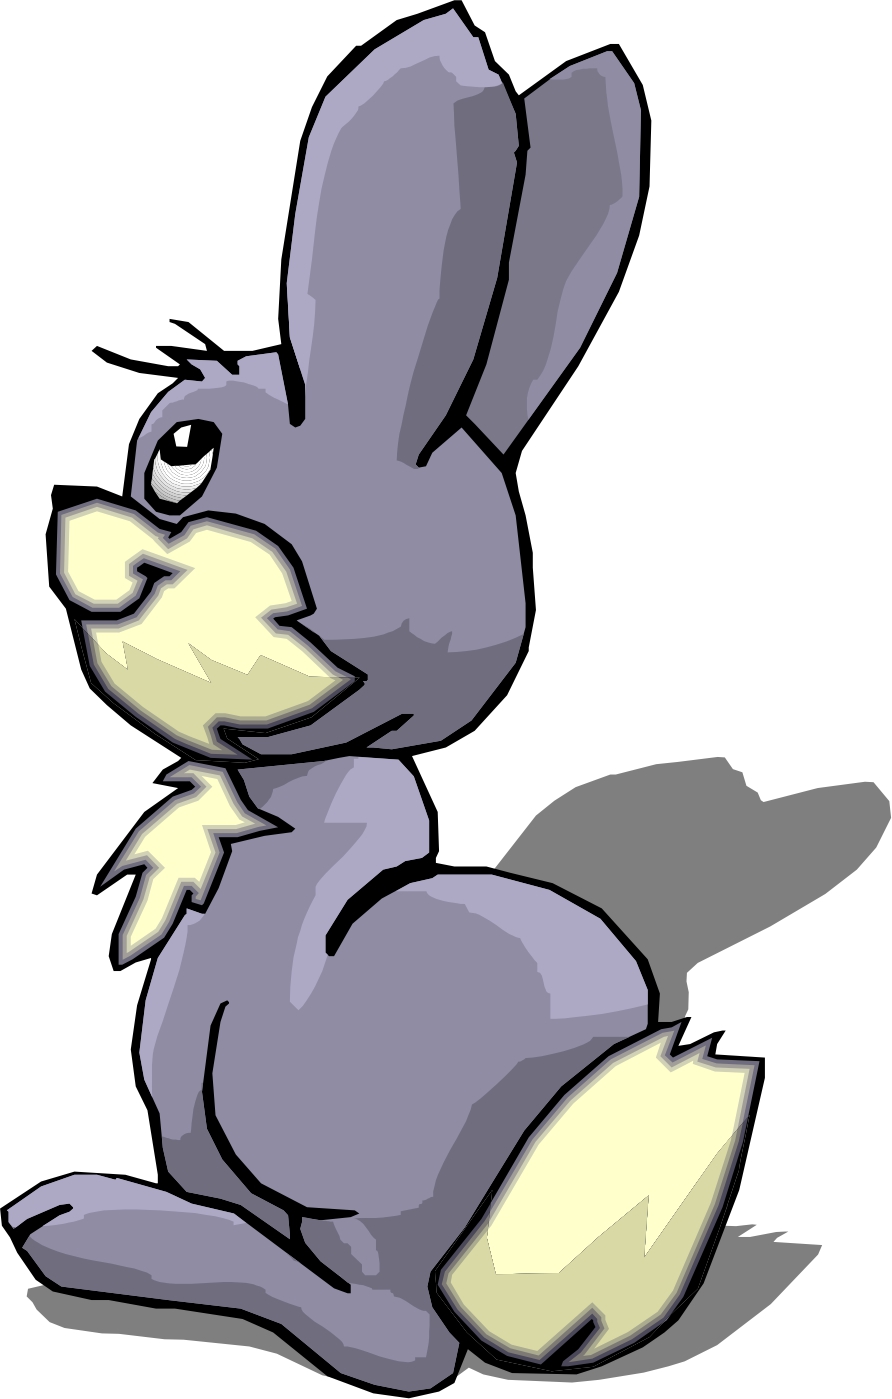 Cute Bunny Pictures Cartoon - ClipArt Best